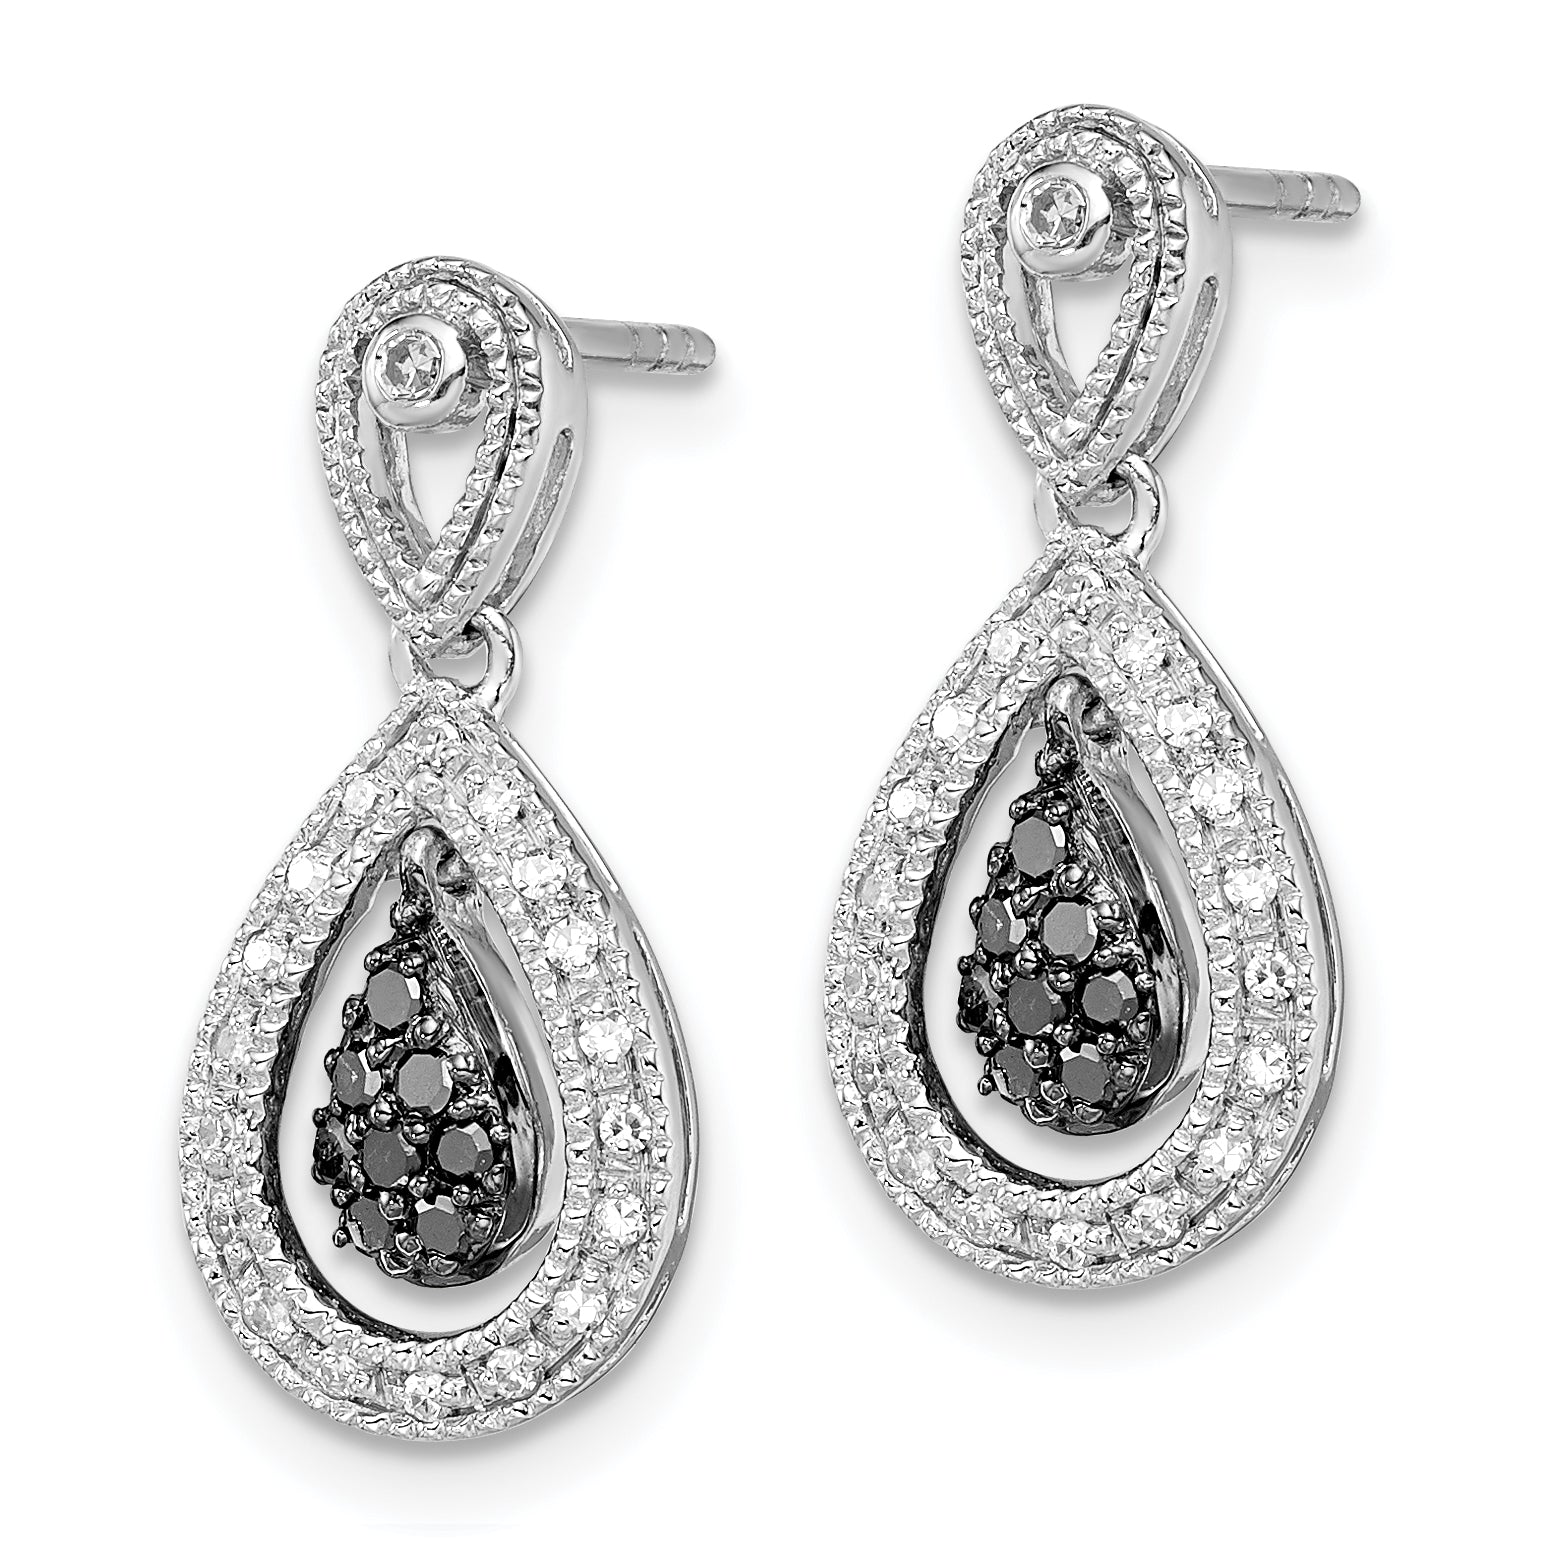 White Night Sterling Silver Rhodium-plated Black and White Diamond Double Teardrop Dangle Post Earrings